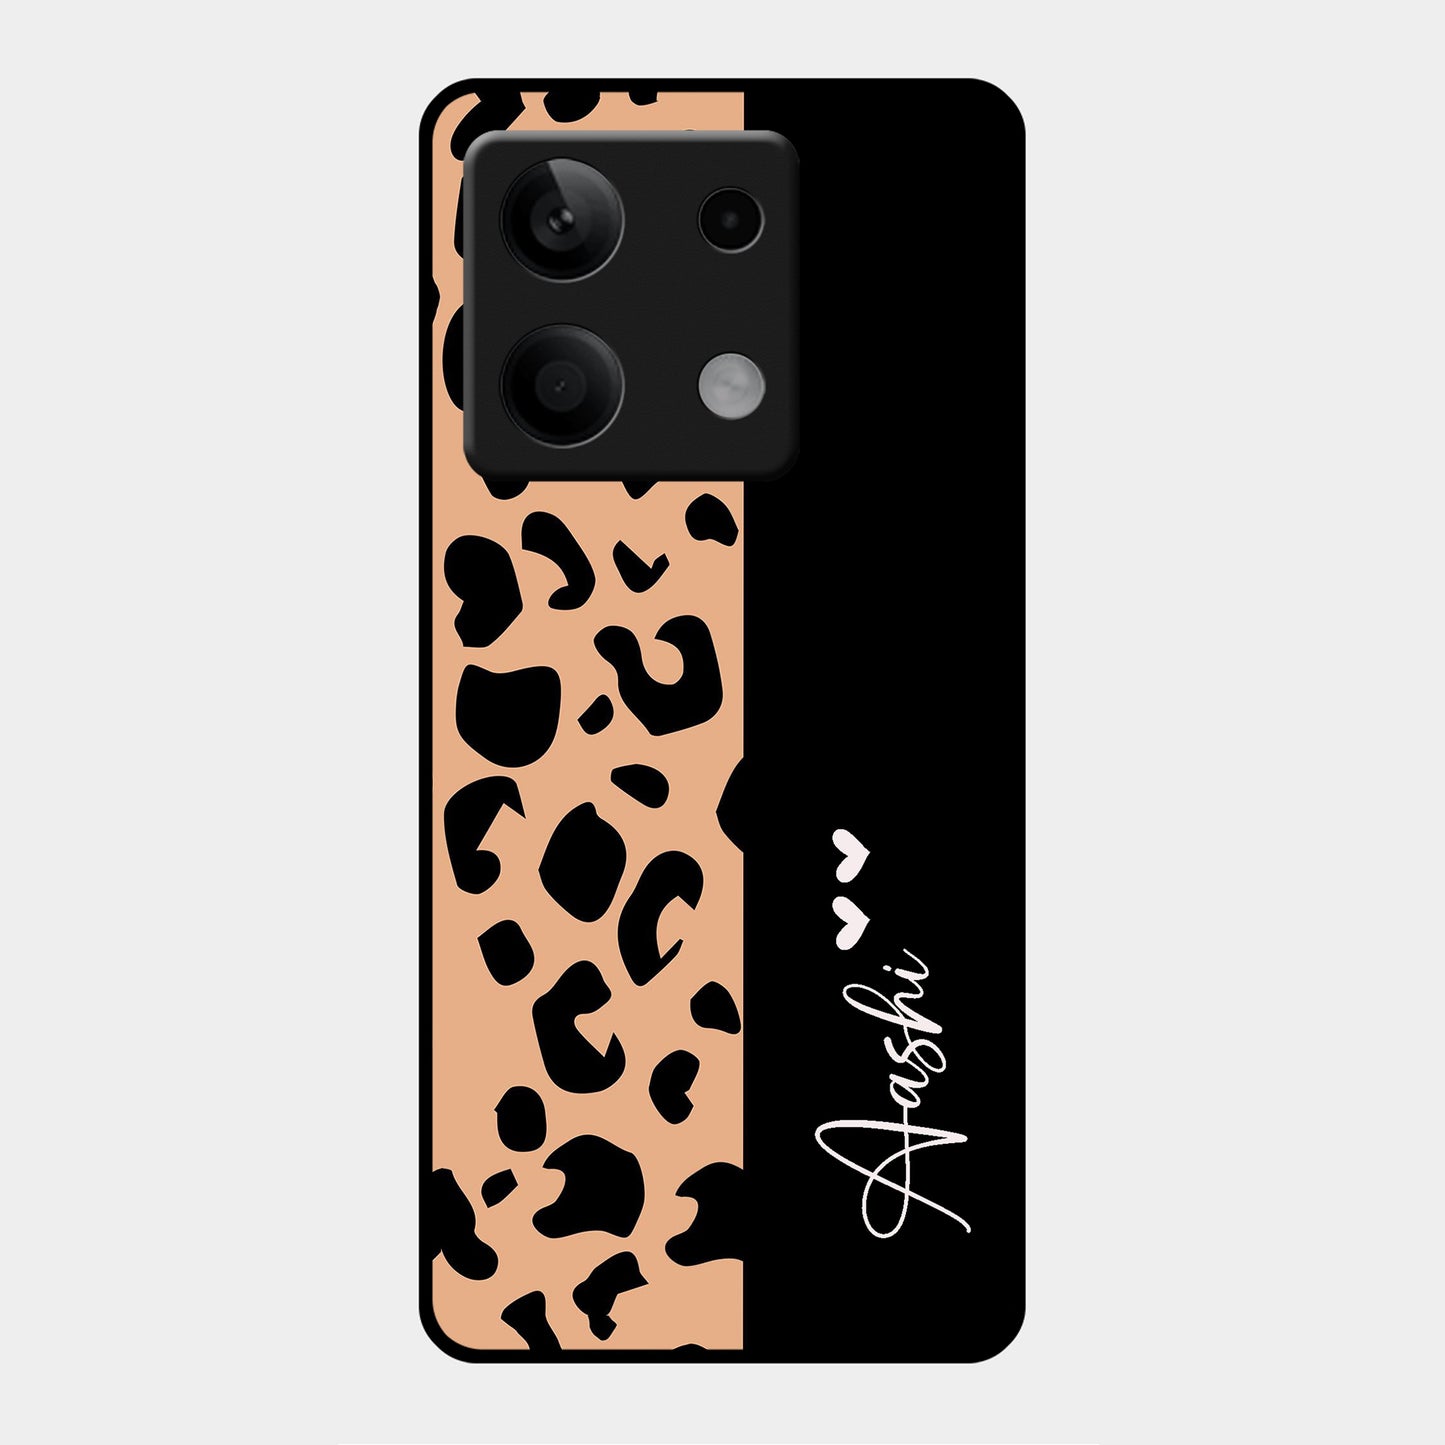 Leopard Glossy Metal Case Cover For Redmi